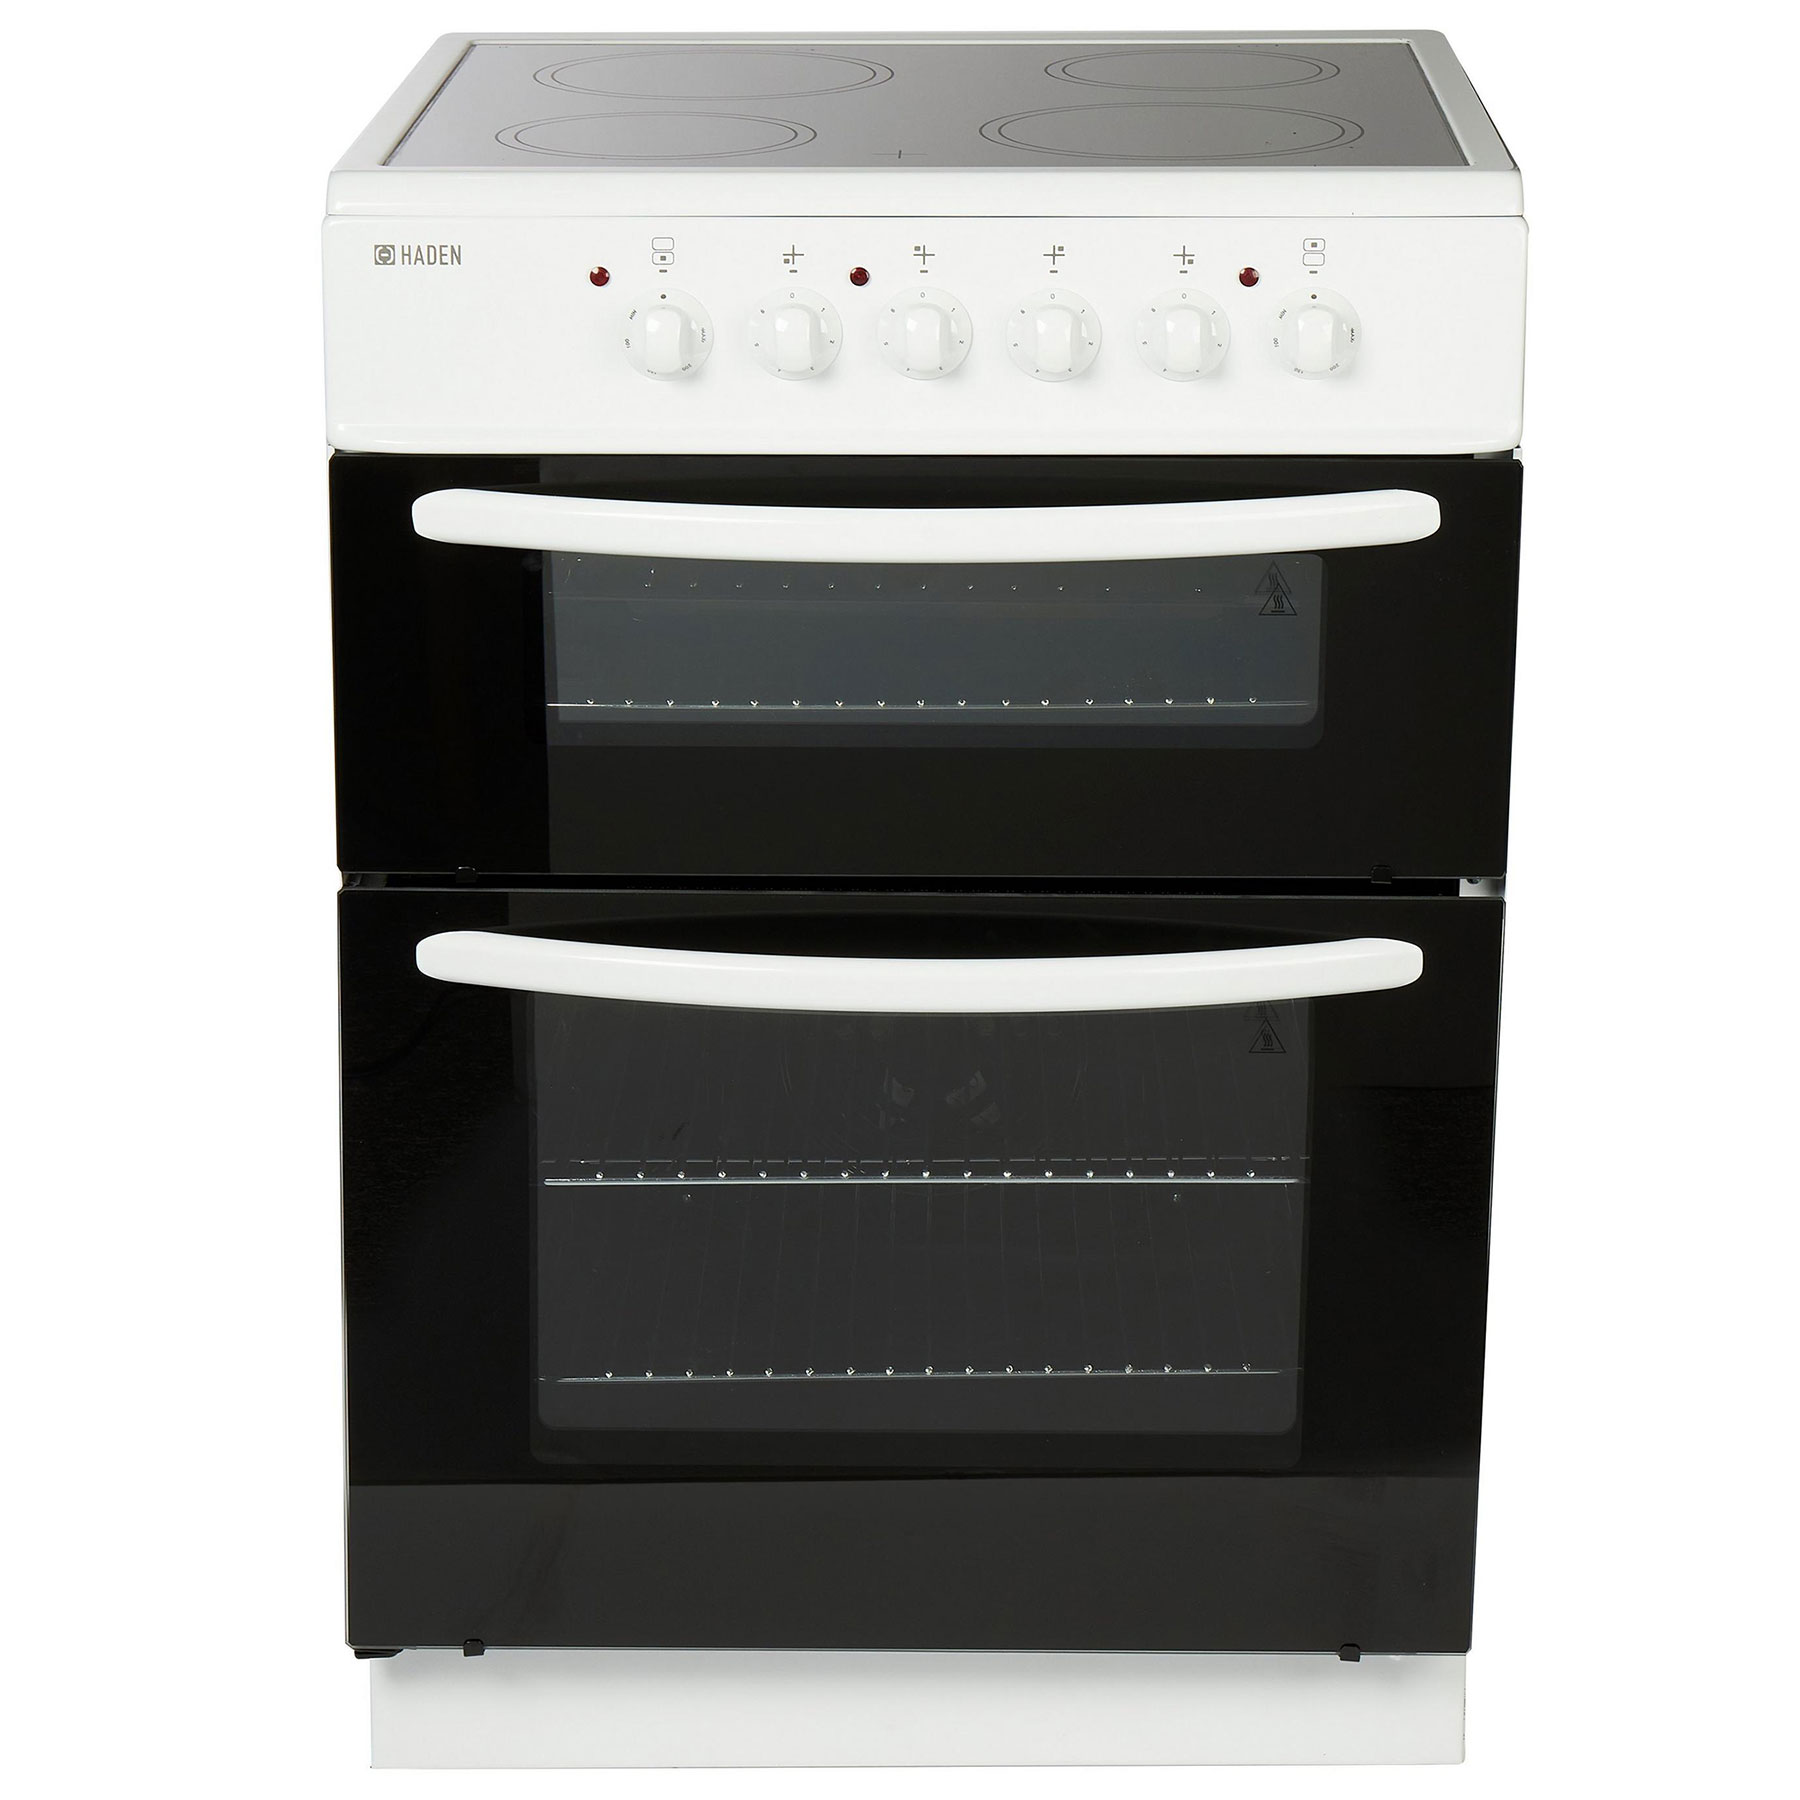 Image of Haden HE60DOMW 60cm Double Oven Electric Cooker in White Ceramic